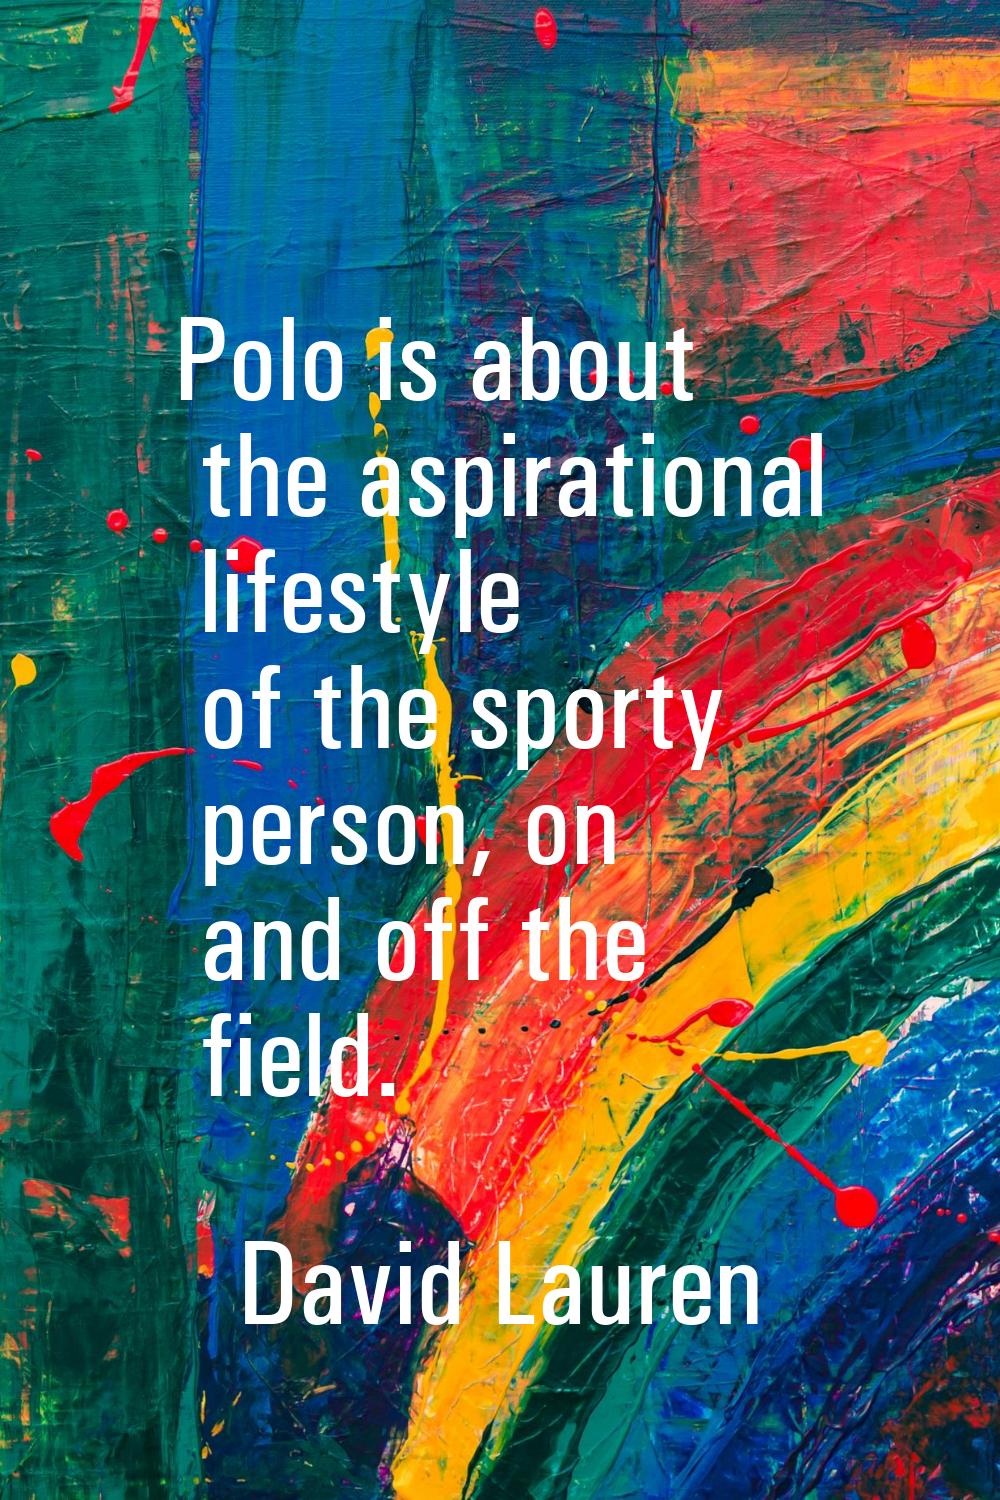 Polo is about the aspirational lifestyle of the sporty person, on and off the field.